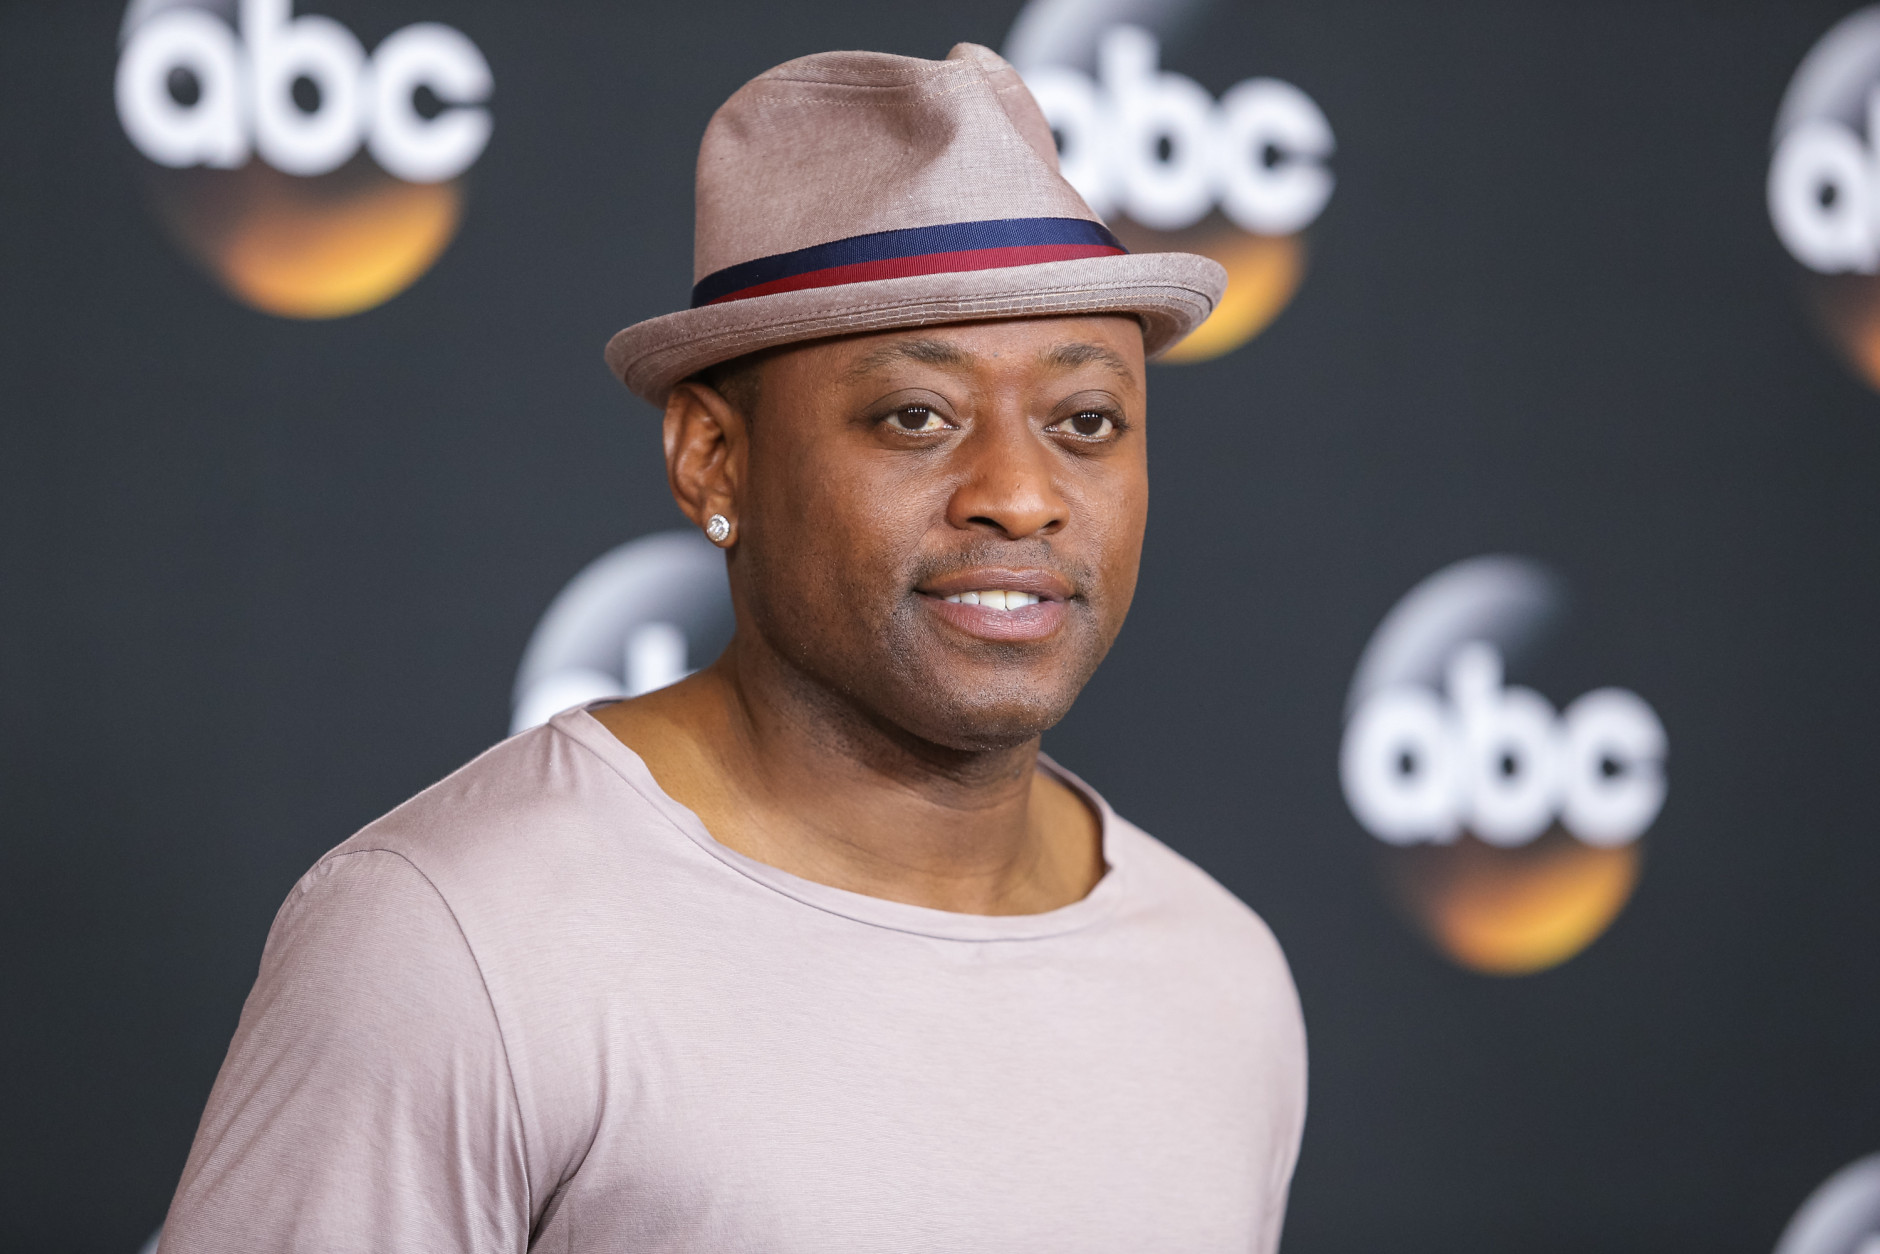 Omar Epps attend the Disney/ABC Television Group 2014 Summer TCA held at the Beverly Hilton Hotel on Tuesday, July 15, 2014, in Beverly Hills, Calif. (Photo by Paul A. Hebert/Invision/AP)